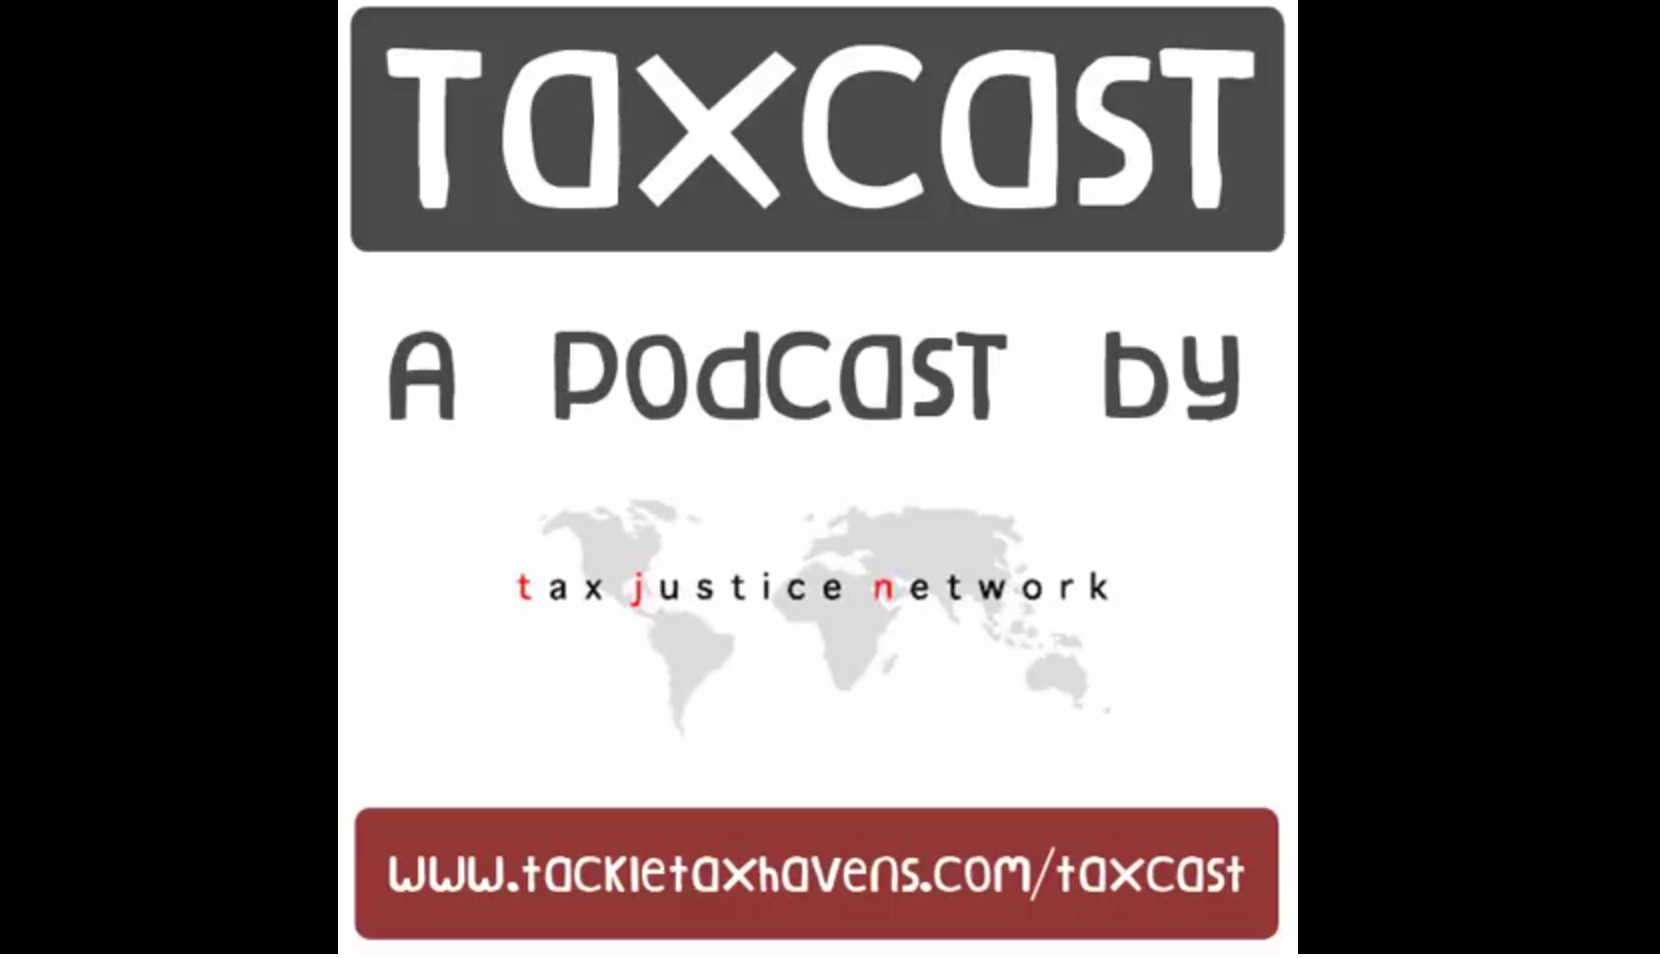 2019-09-05-The Taxcast - August 2019 Tax Justice Network Podcast-EN-IMAGEM PRINCIPAL